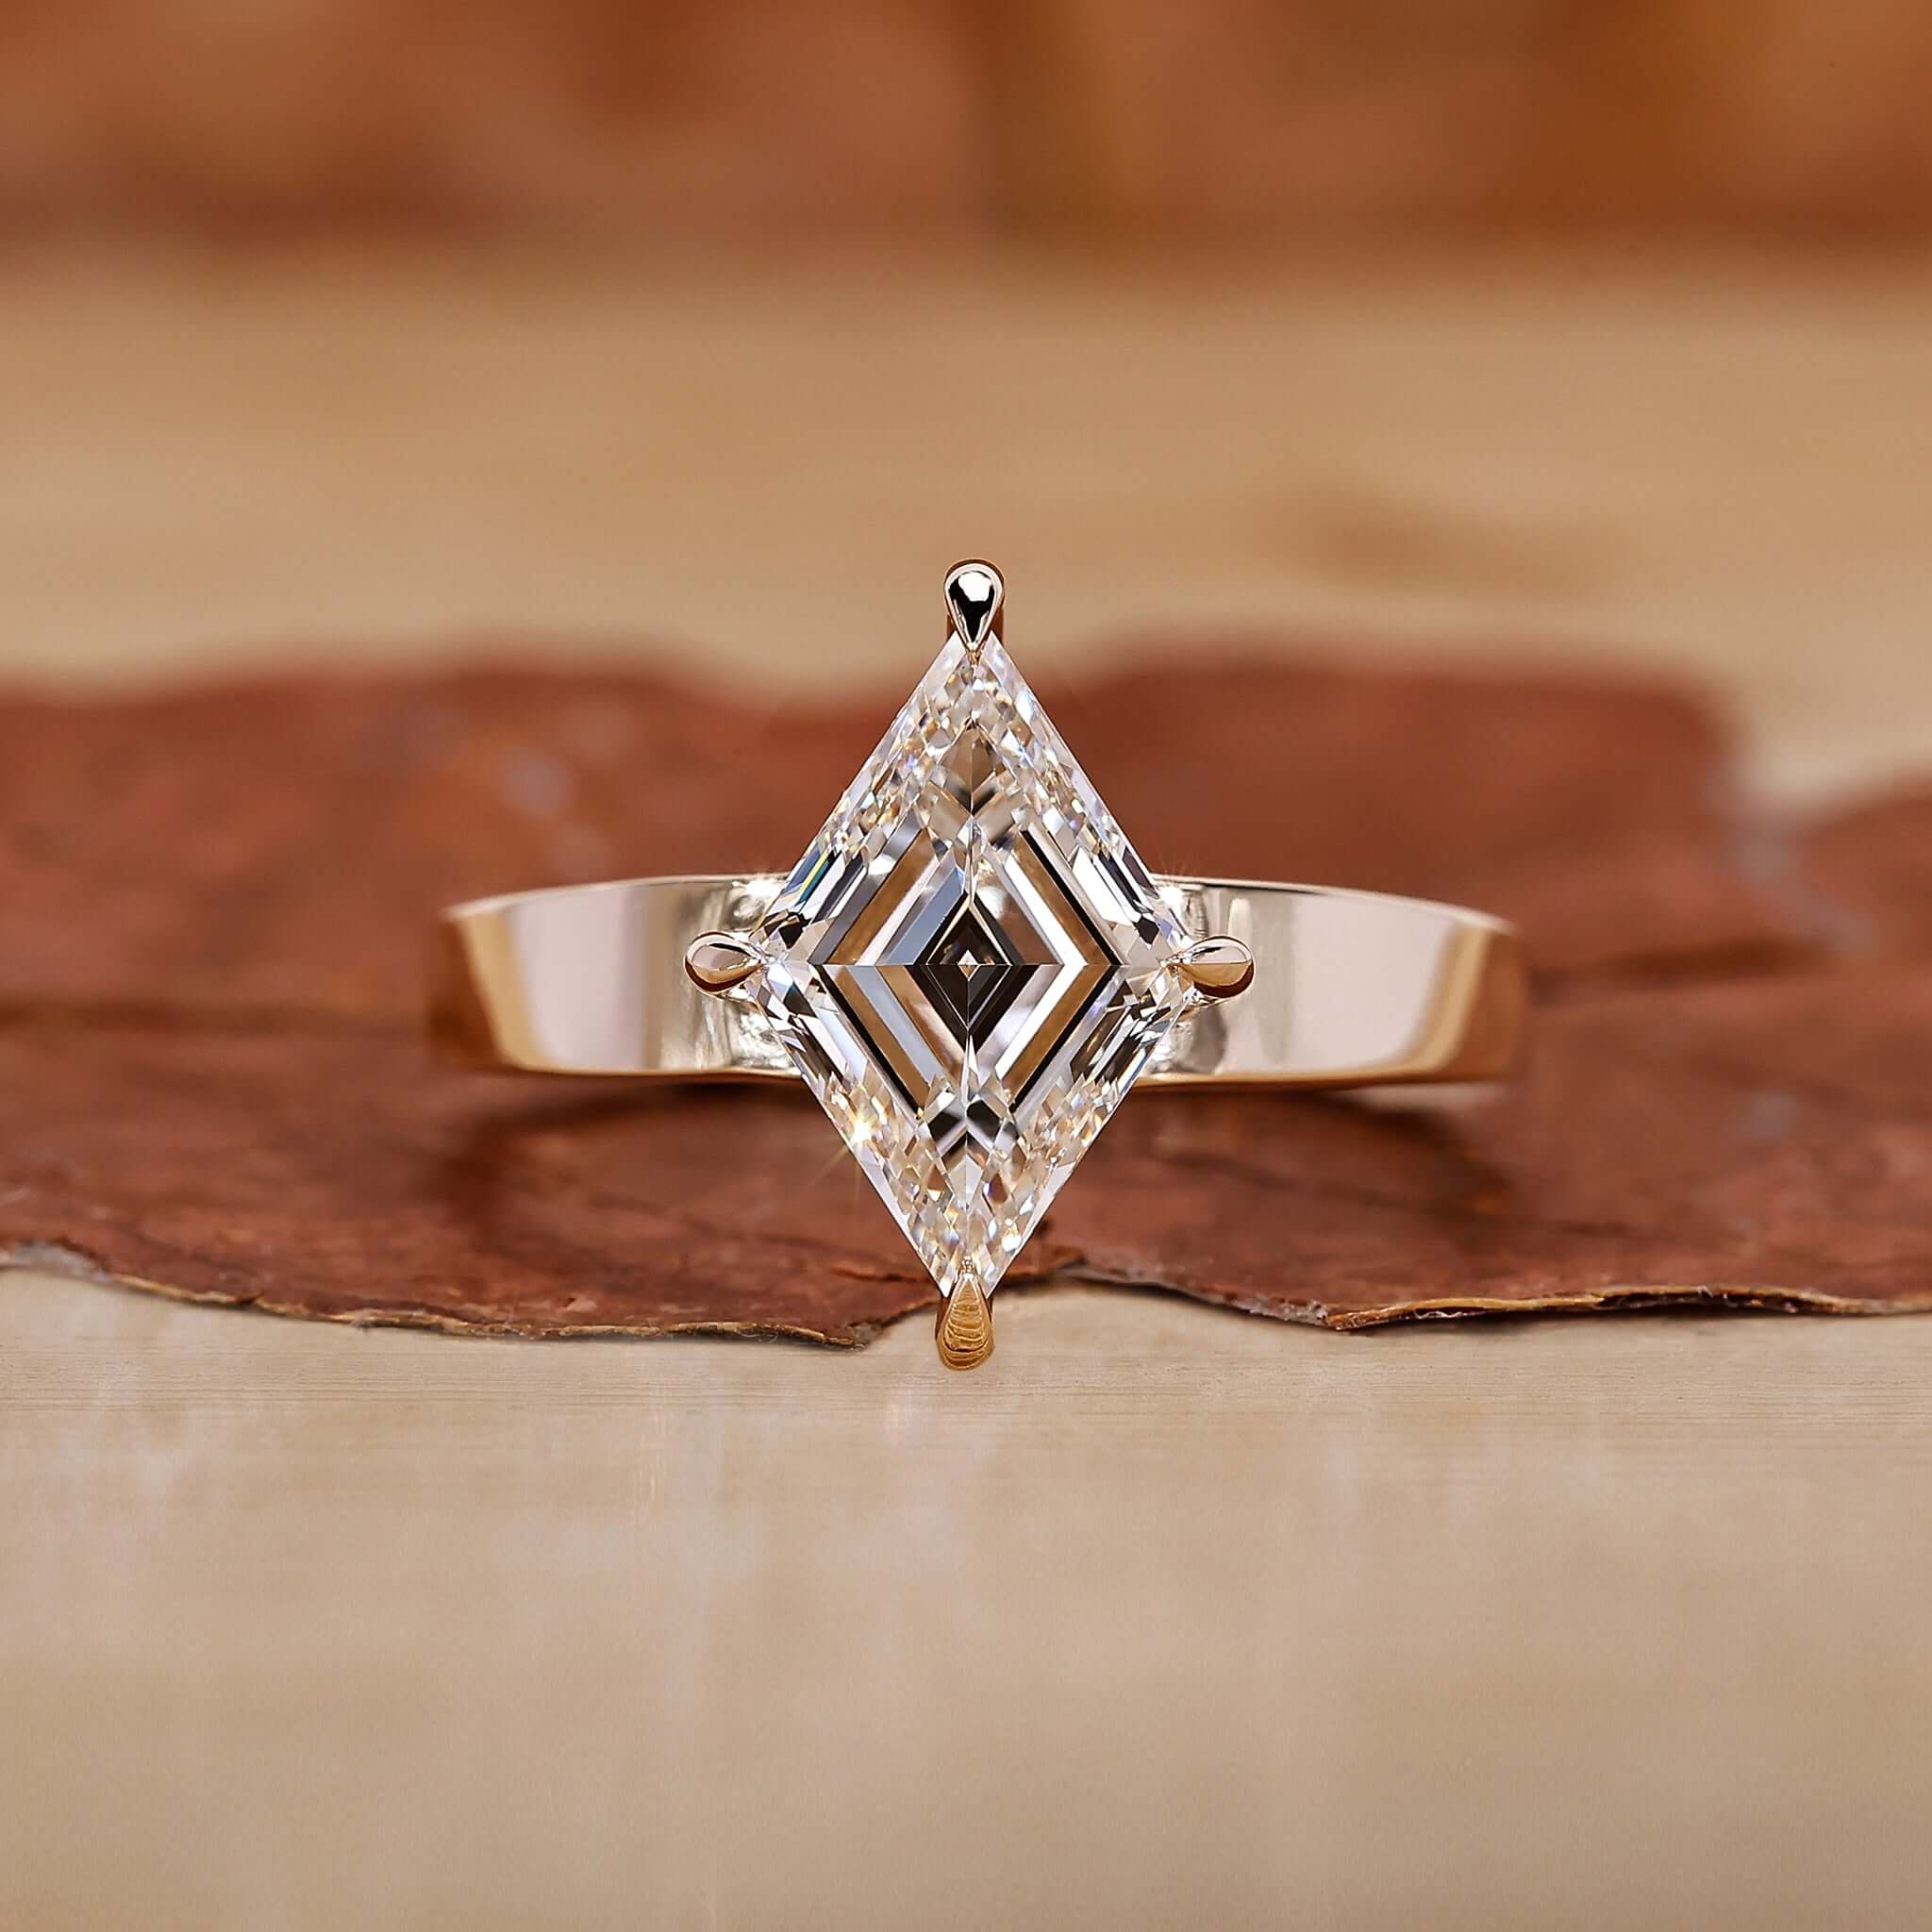 An elegant gold engagement ring featuring a stunning lozenge cut diamond as the centerpiece.